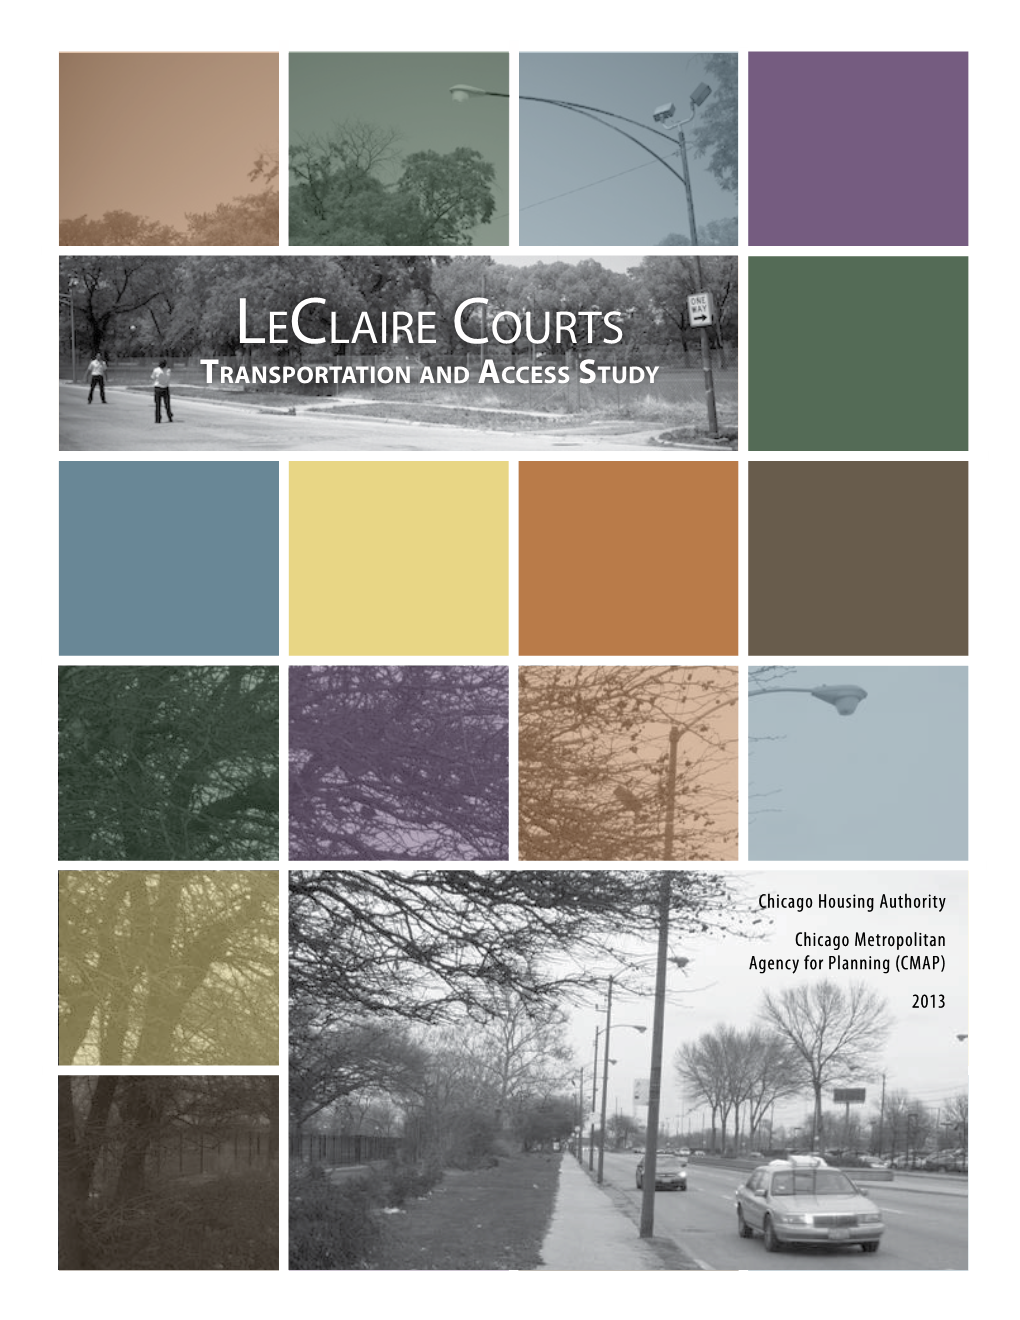 Leclaire Courts Transportation and Access Study